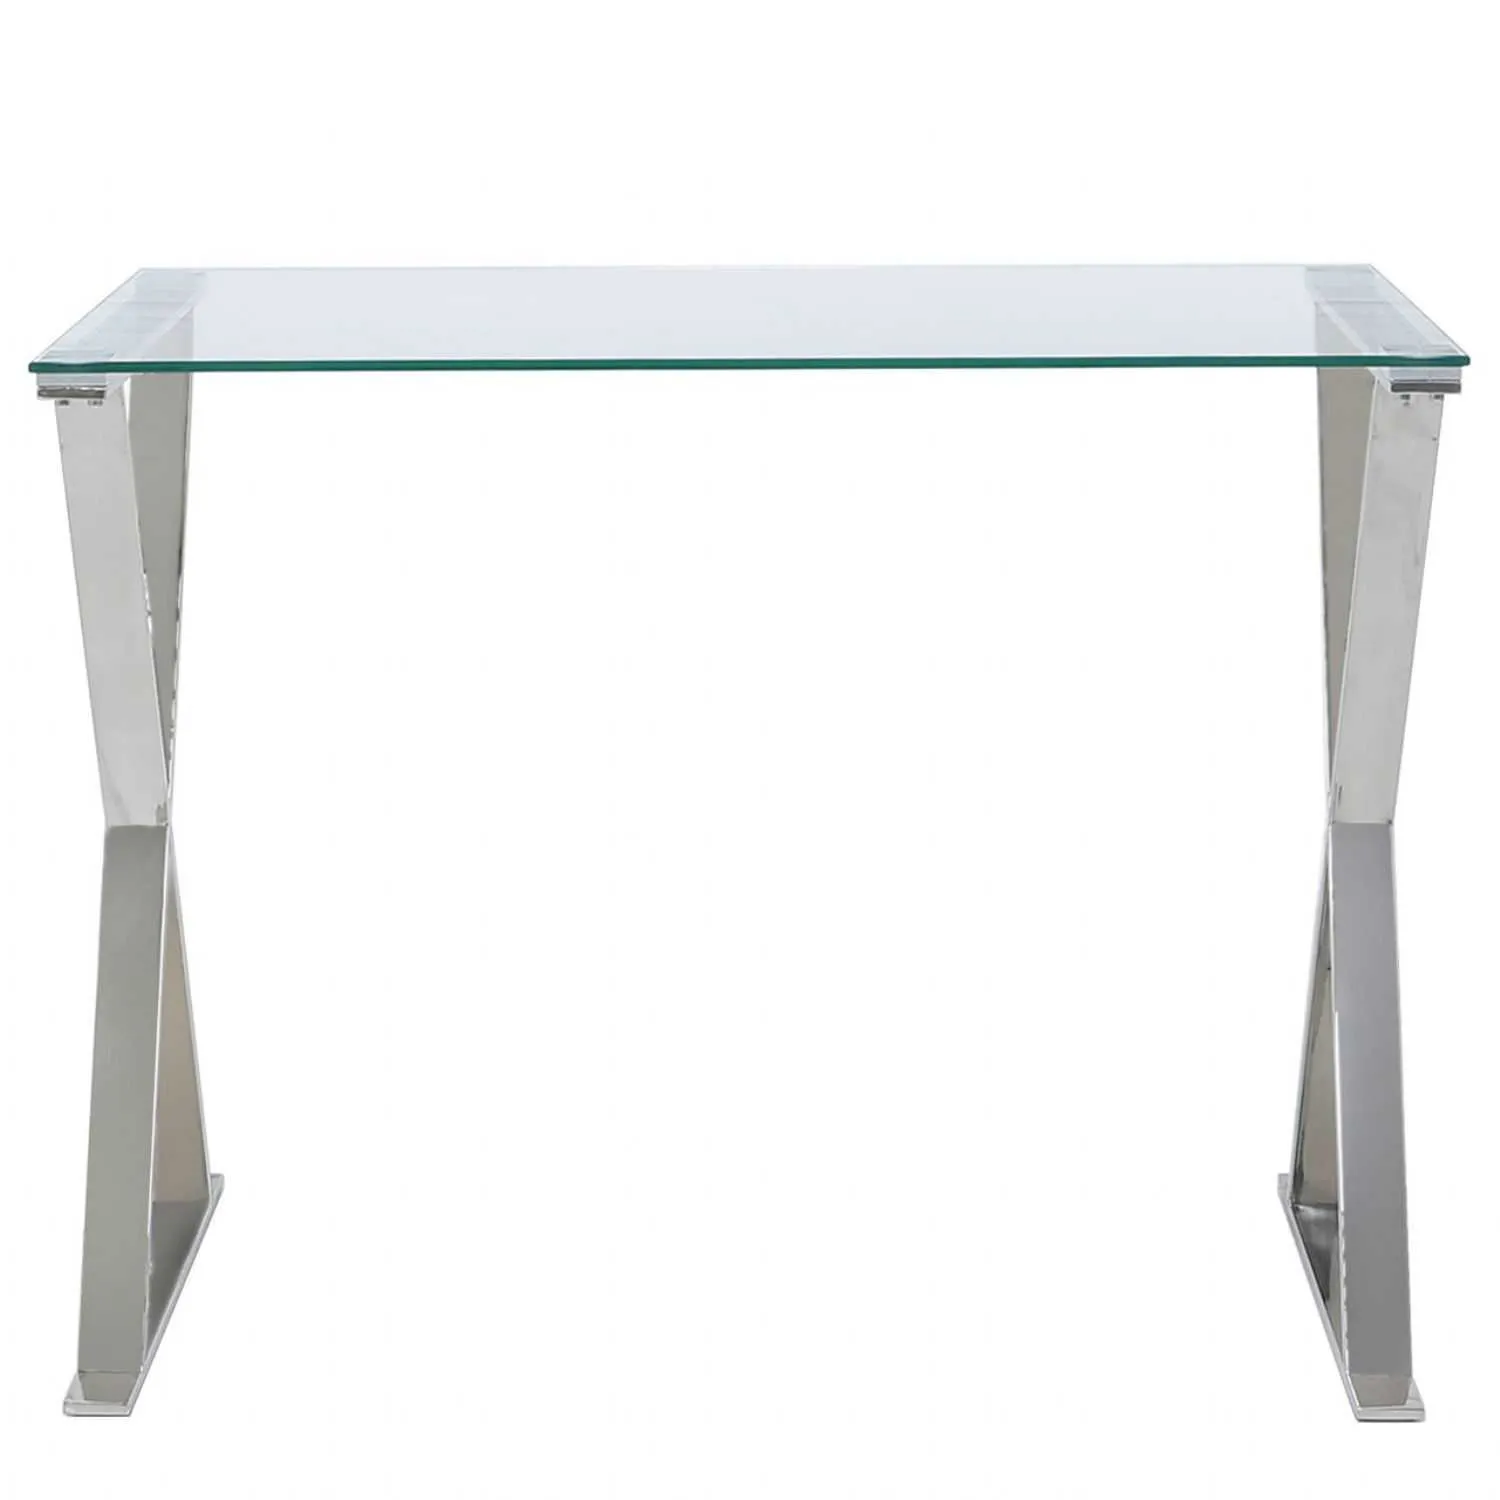 Xena Stainless Steel Desk Clear Glass